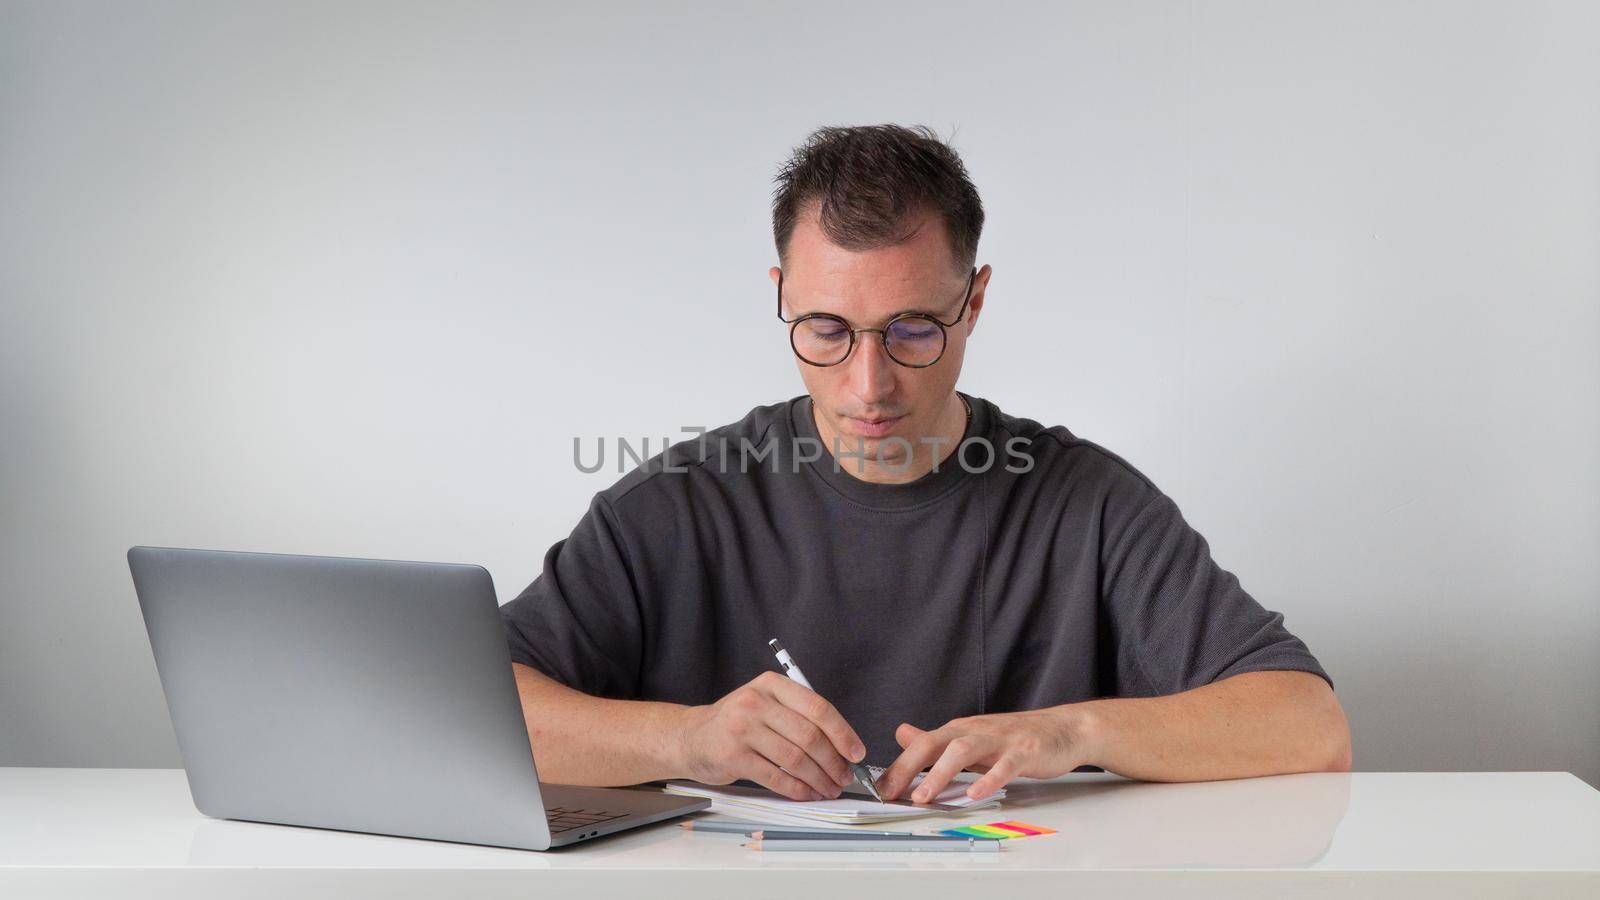 A student with glasses learns with a laptop and notebooks. High quality photo